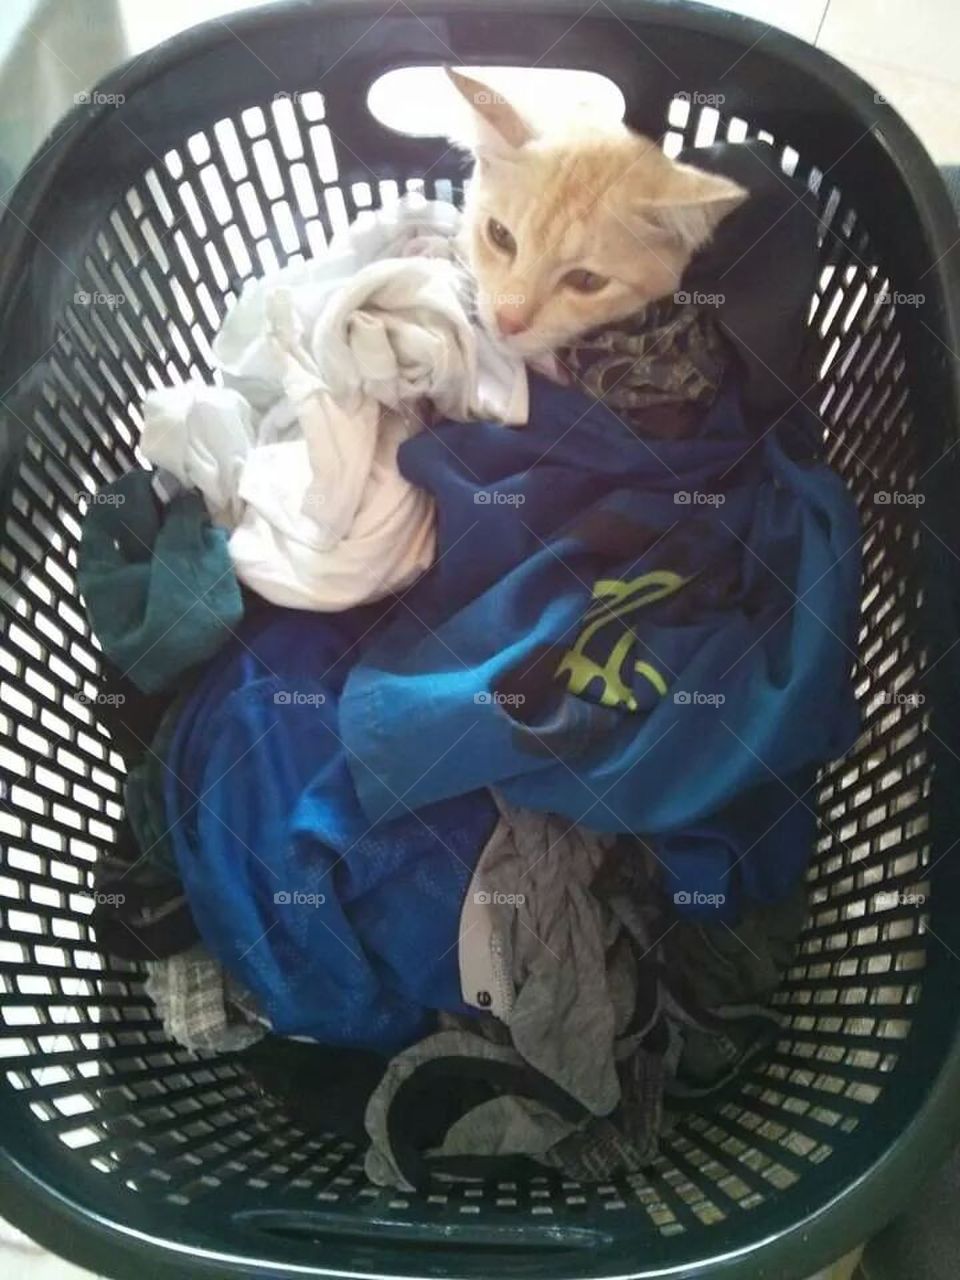 Garfield stuck in the laundry basket